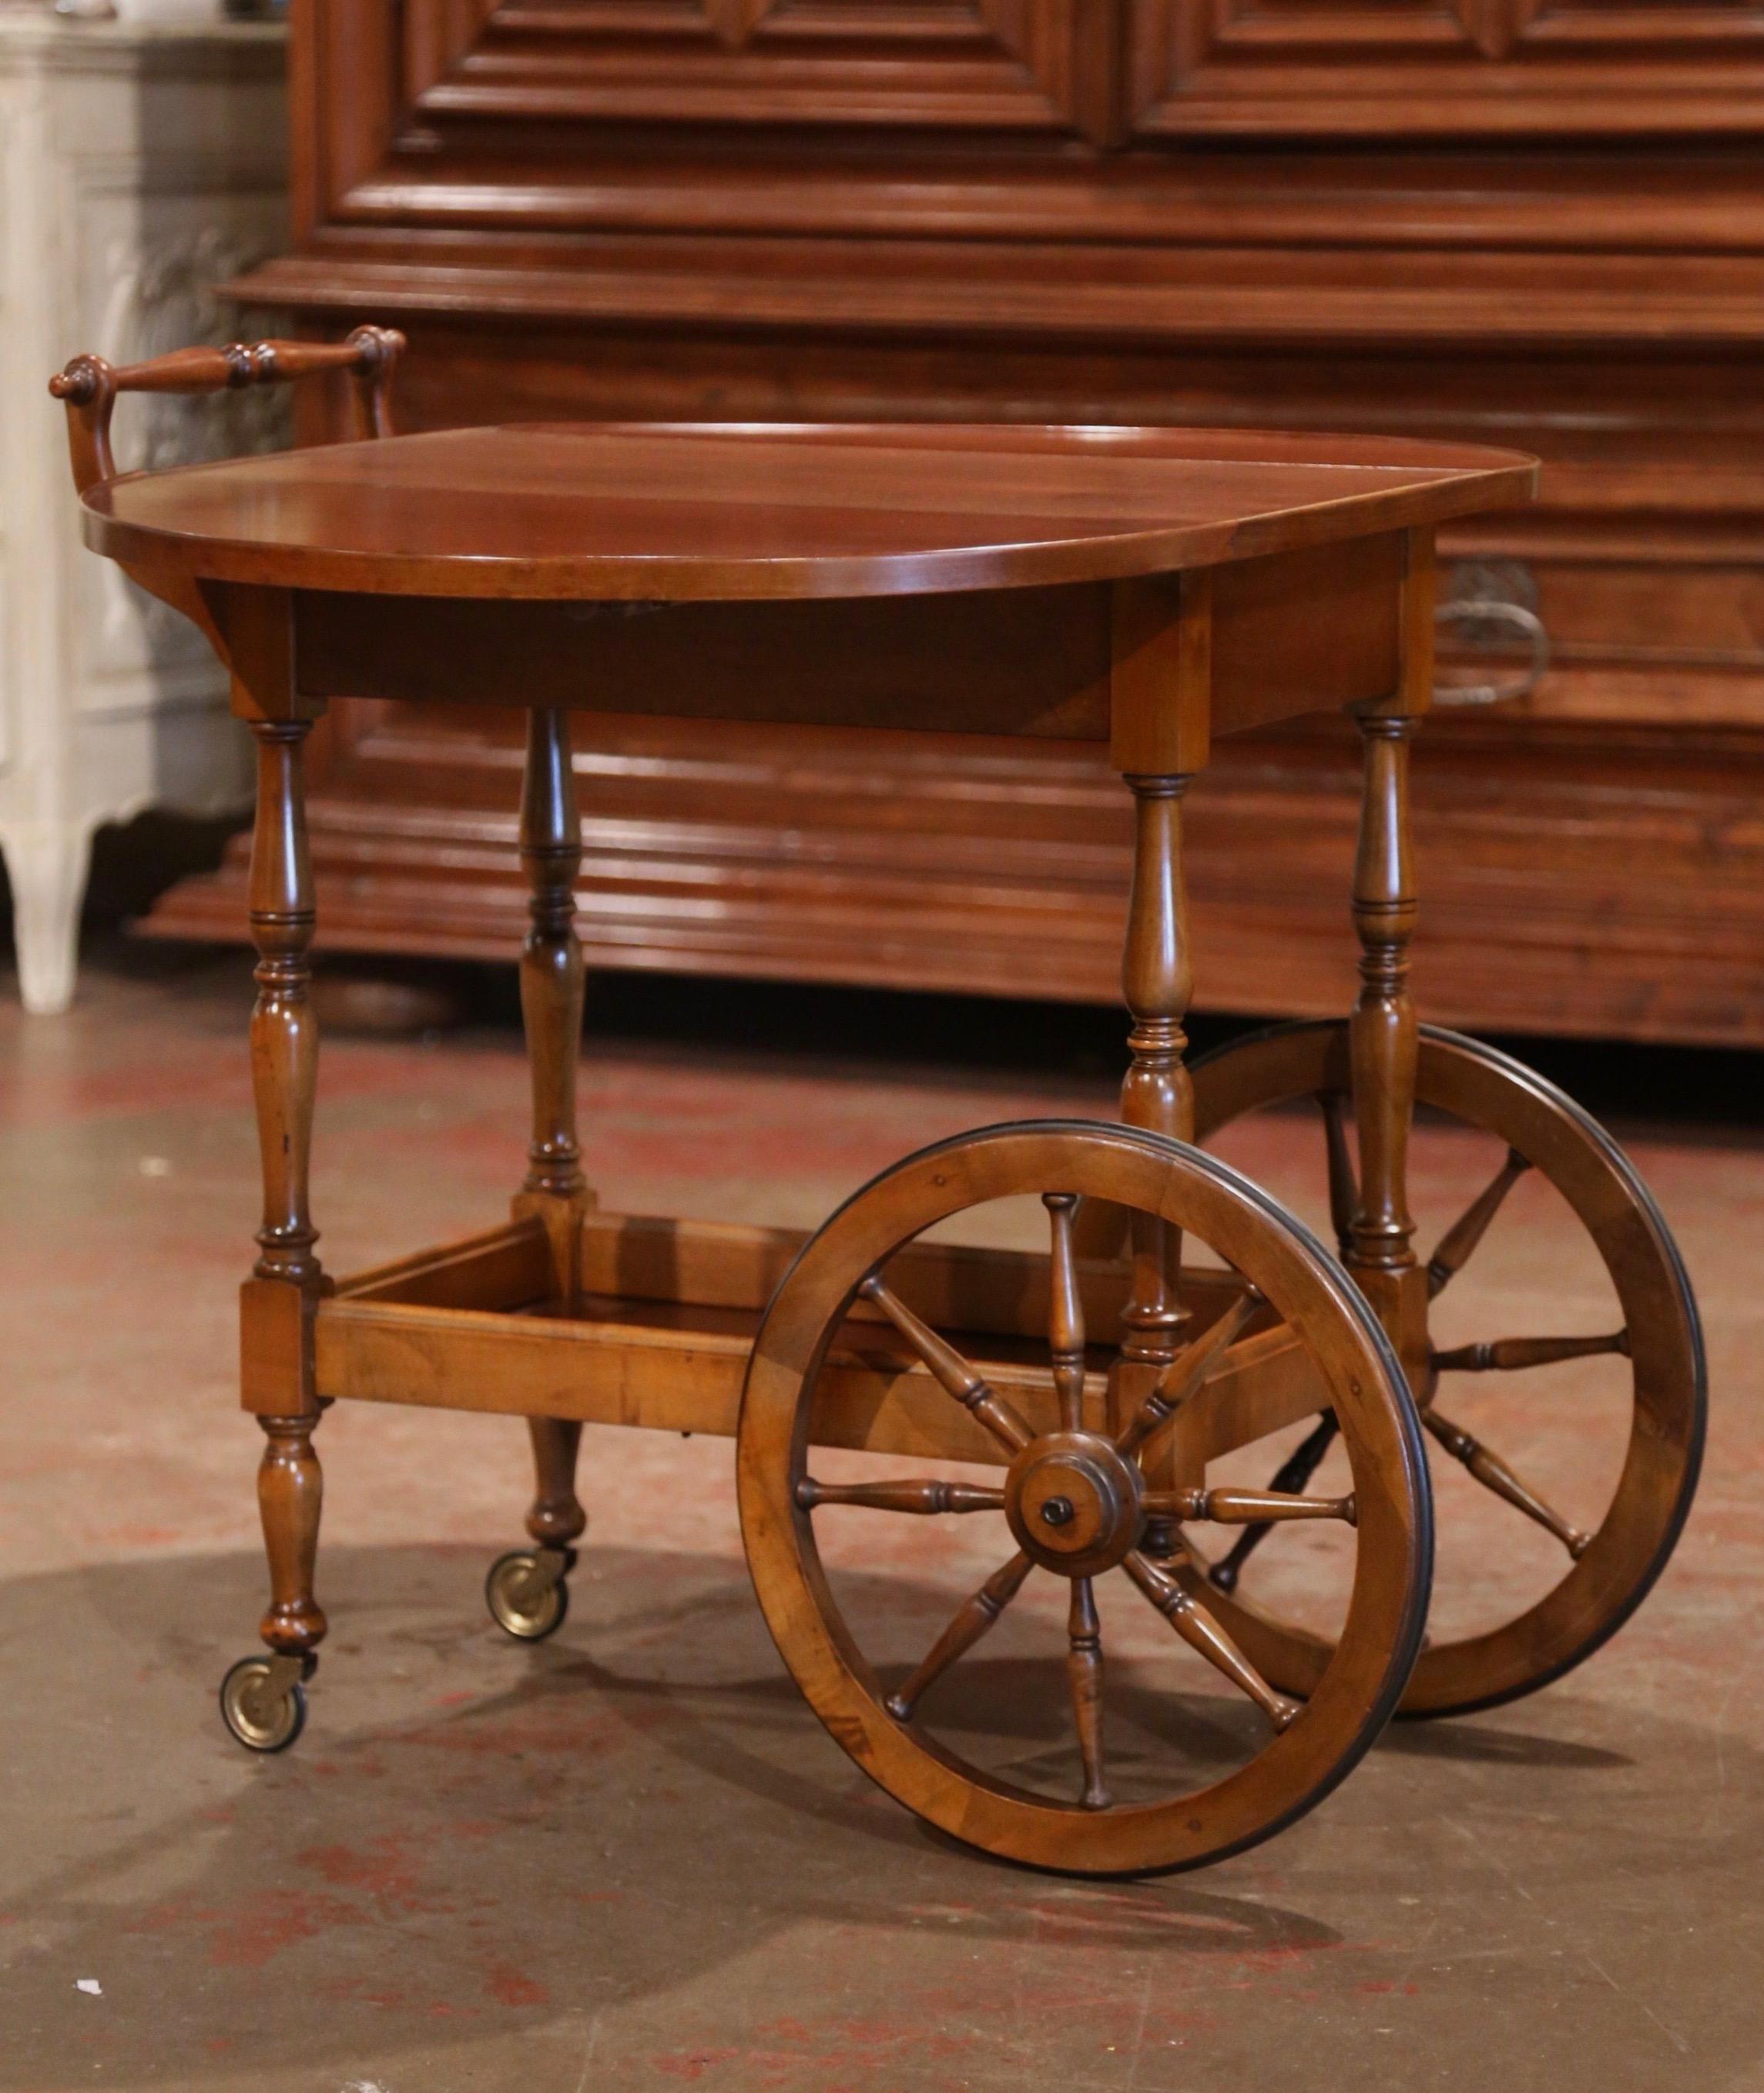 Hand-Carved Late 20th Century French Walnut Drop-Leaf Tea Trolley Service Cart on Wheels